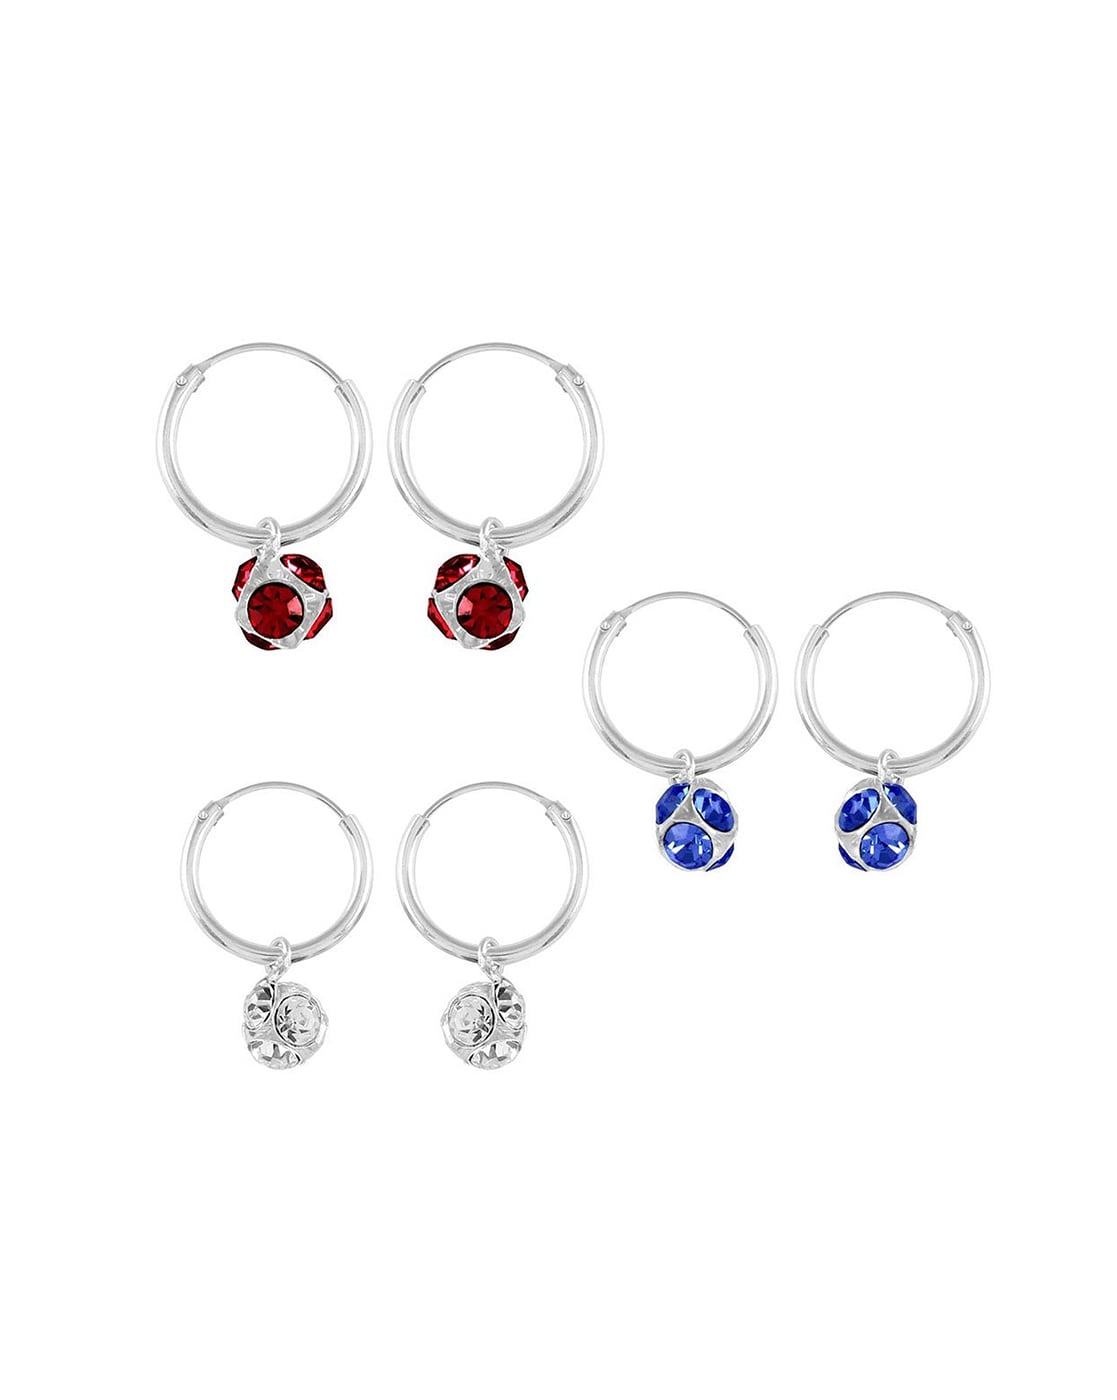 925 Sterling Silver Hoop Bali Earrings with red crystal for Girls age  between 3 years to 8 years Too Small Size Pure Chandi Kundal  Amazonin  Jewellery